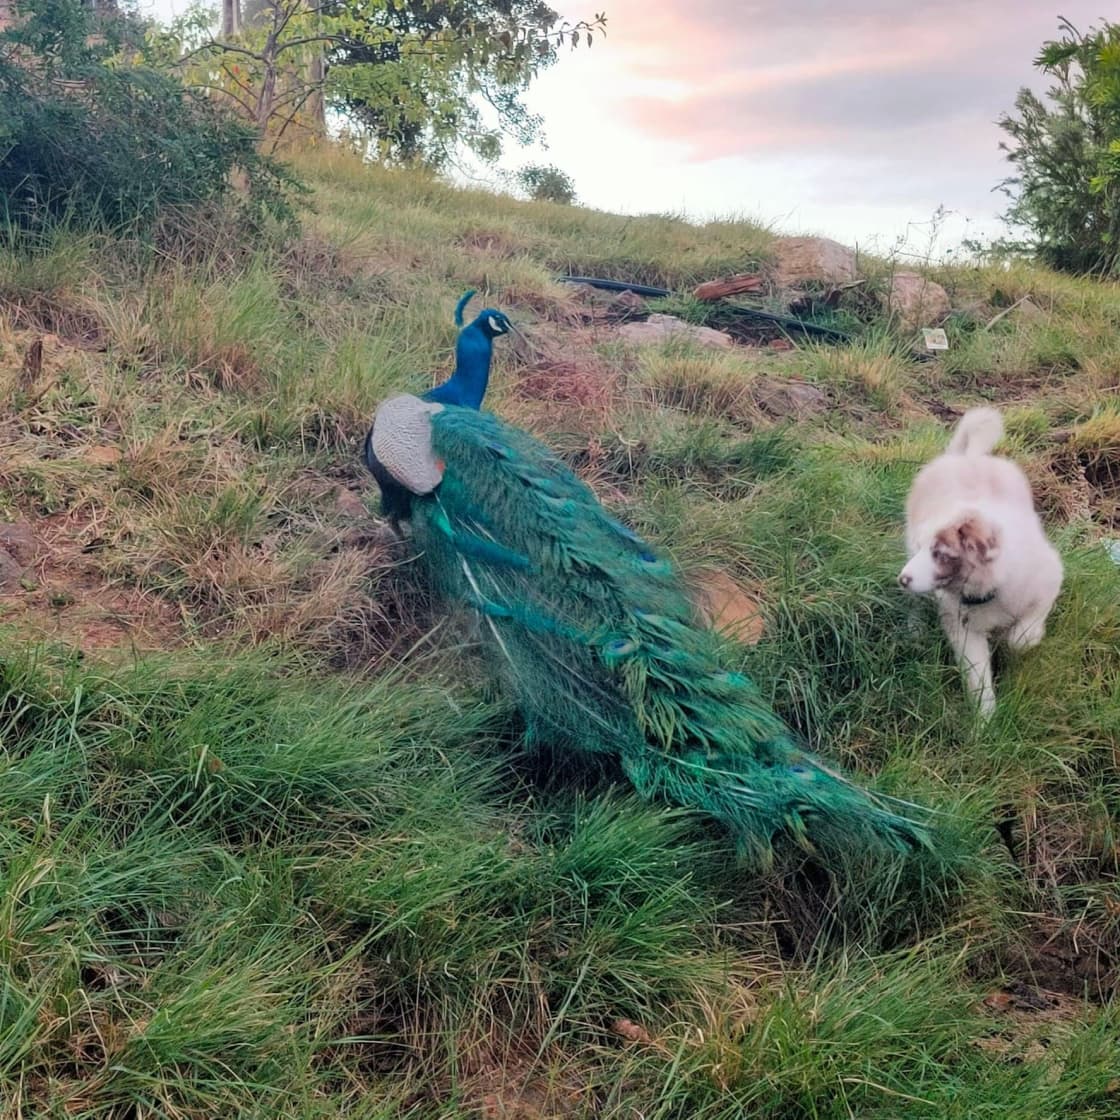 Zelda playing with the Peacock 